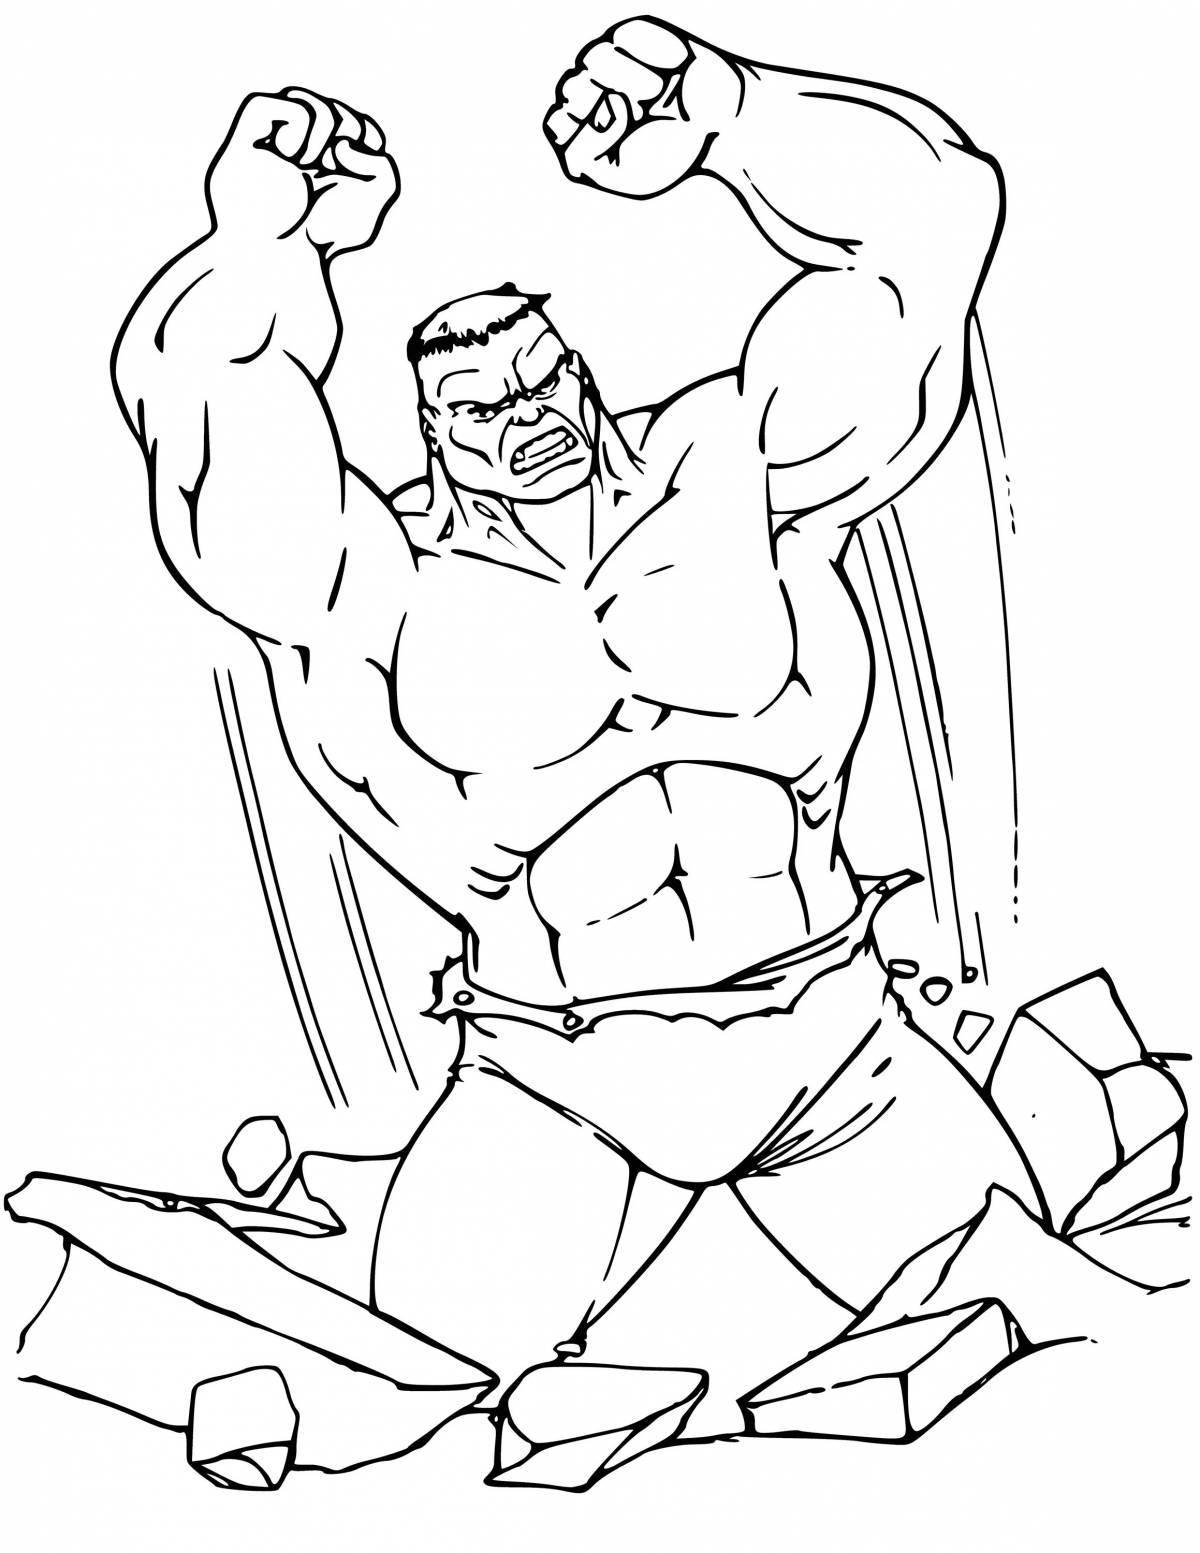 Brightly colored hulk coloring page